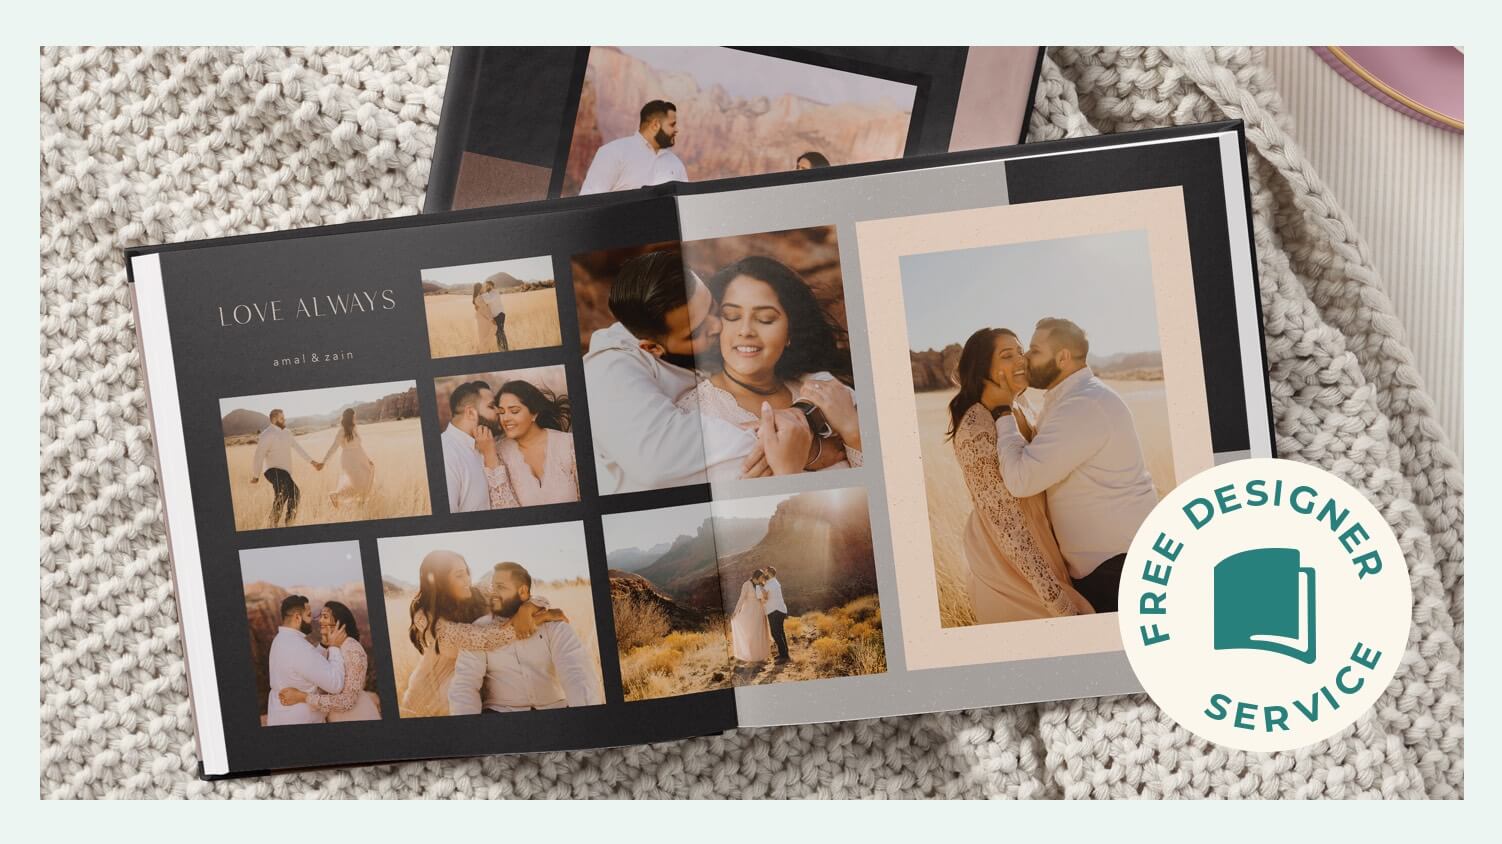 Engagement photos in a photo book made with free designer photo book service.